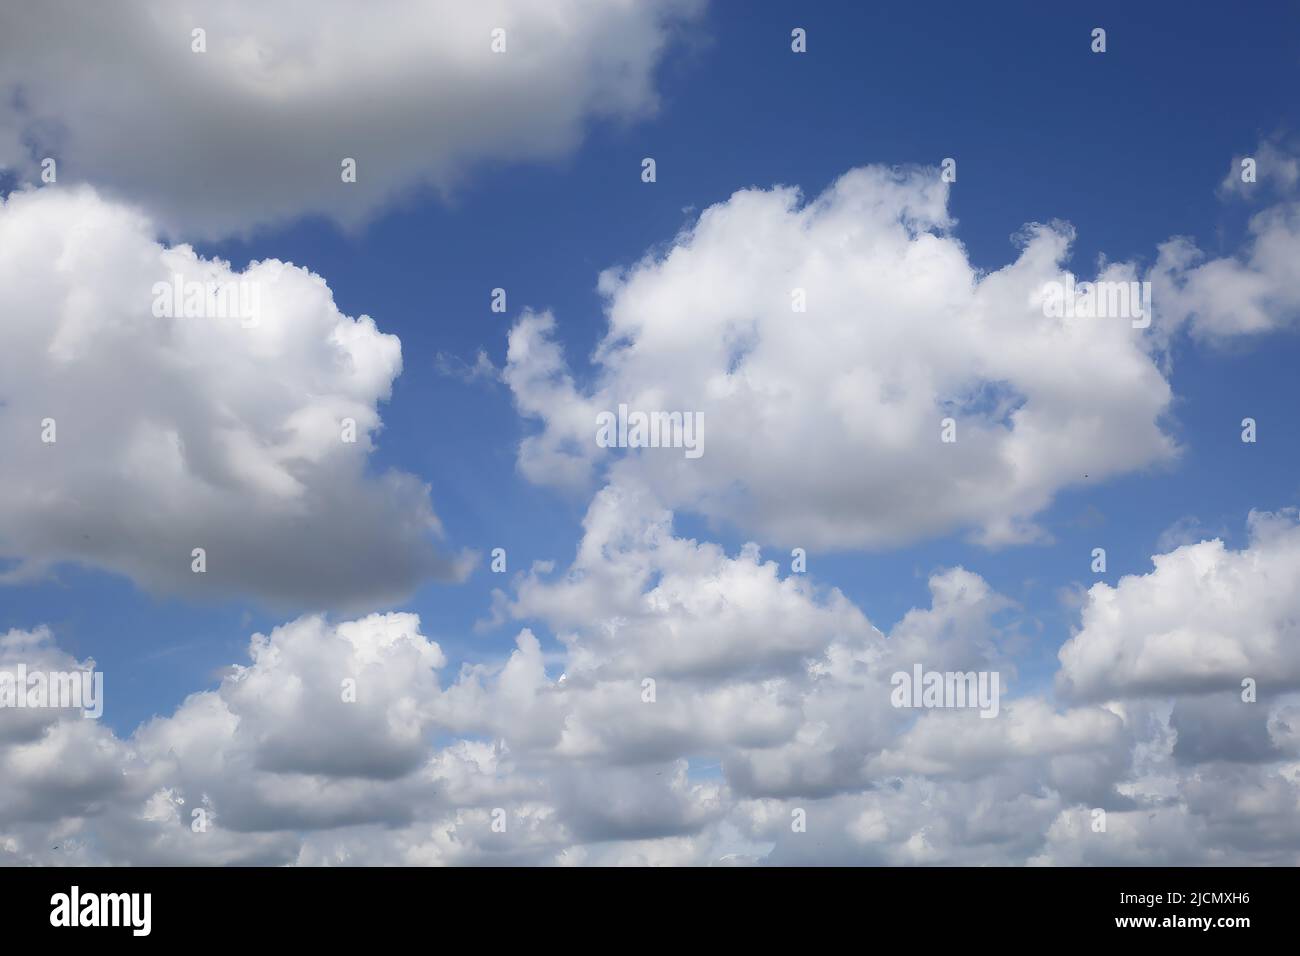 Isolated blue summer sky cloudscape photo with white fluffy fair weather cumulus clouds Stock Photo